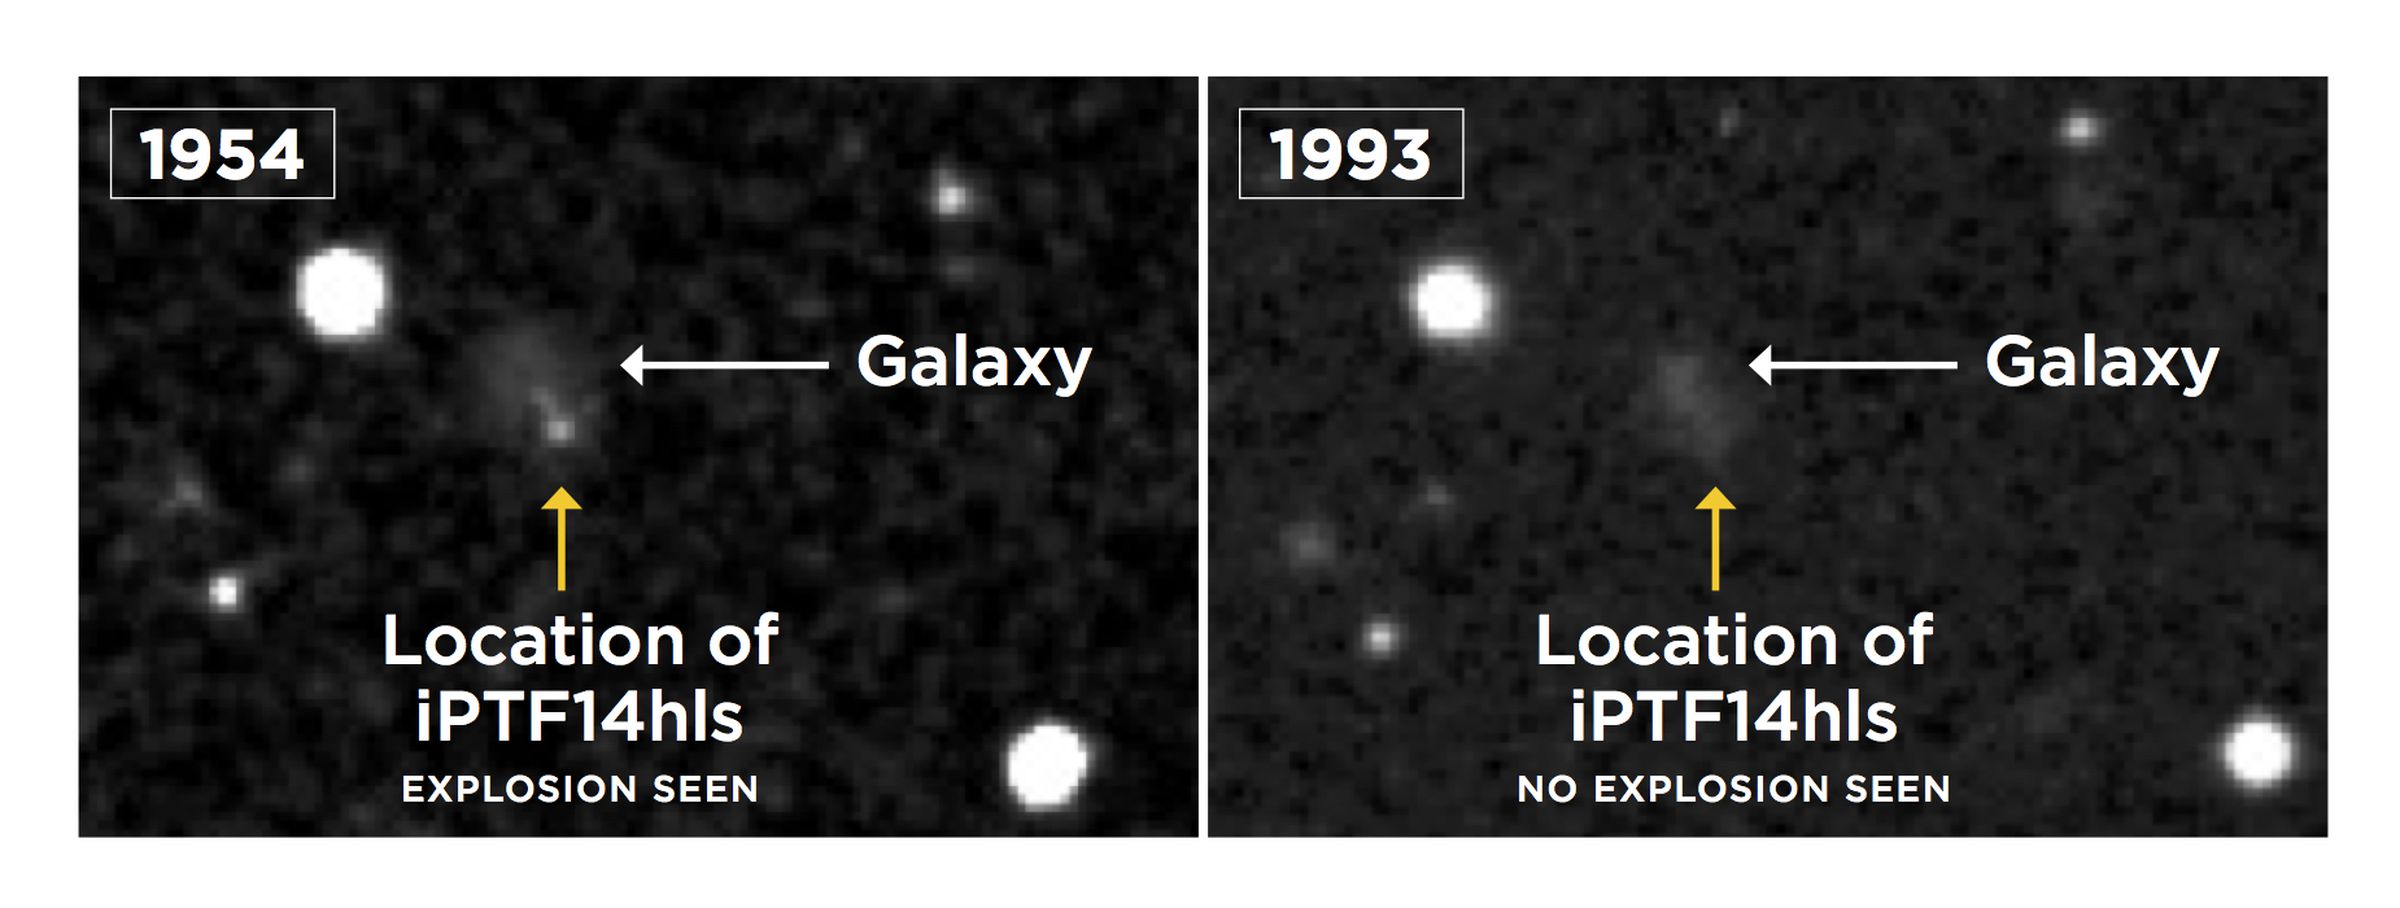 An image of the supernova in 1954, compared to 1993 when it was dark.